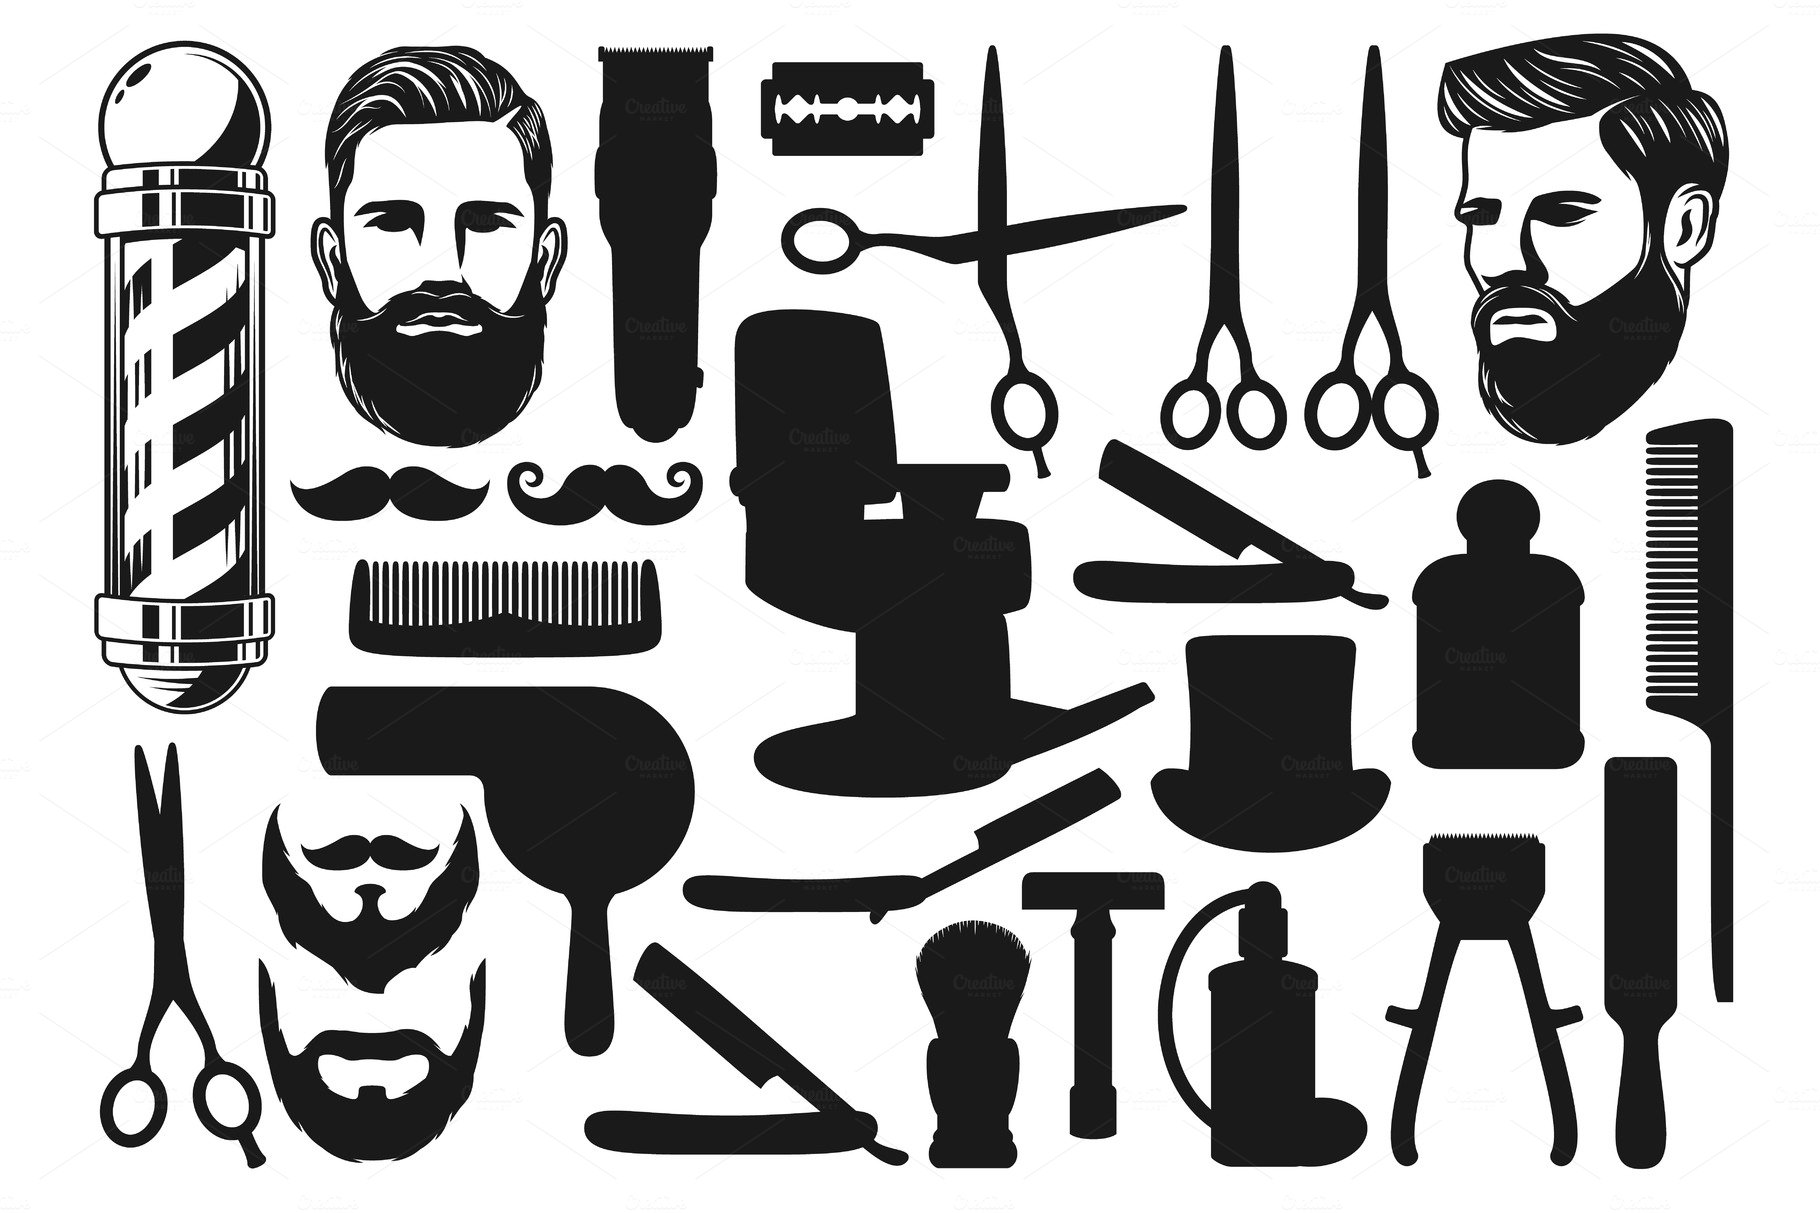 Cutting, shaving, barbershop cover image.